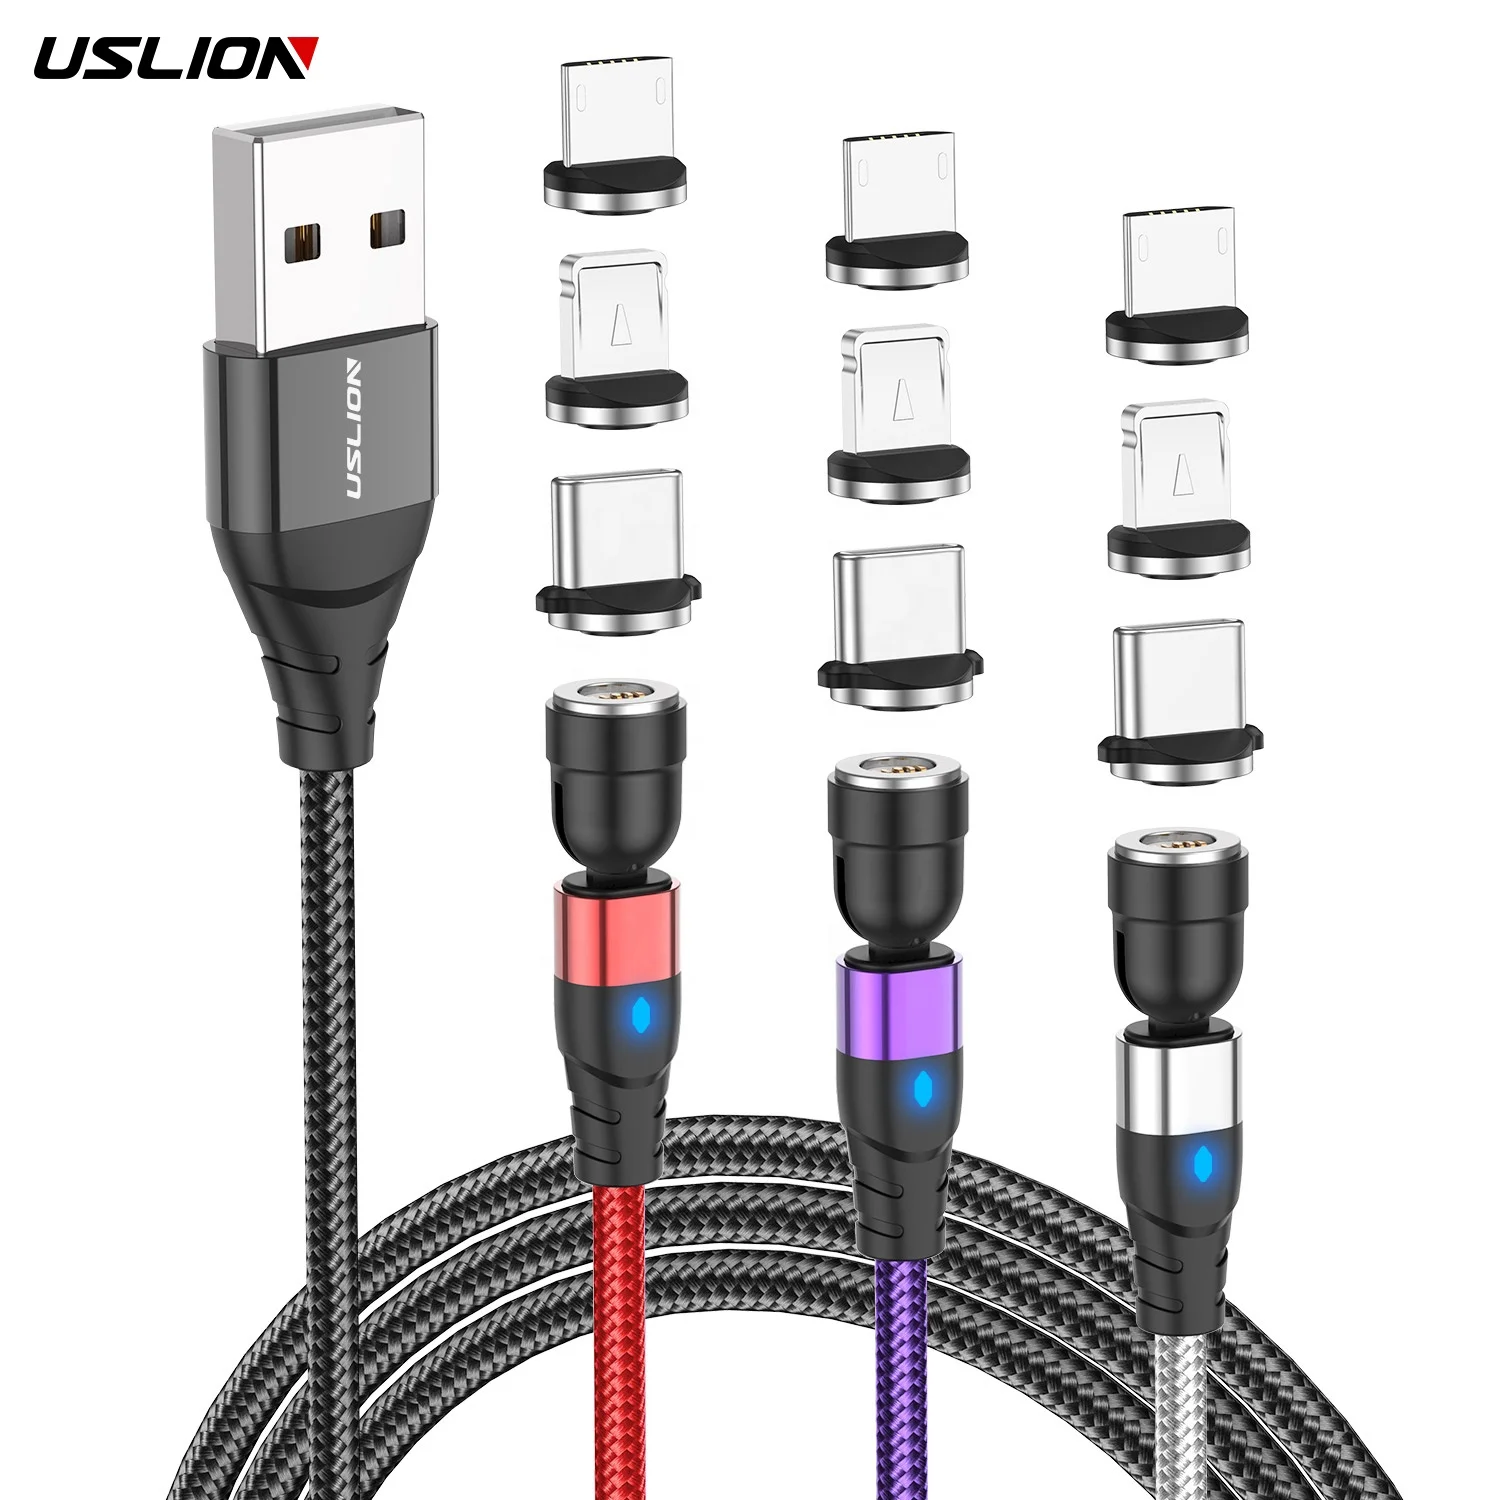 

USLION 540 Rotate 3 IN 1 USB Magnetic Cable 3A Fast Charging Data Cable Mobile Phone Game cable, Black/red/silver/purple